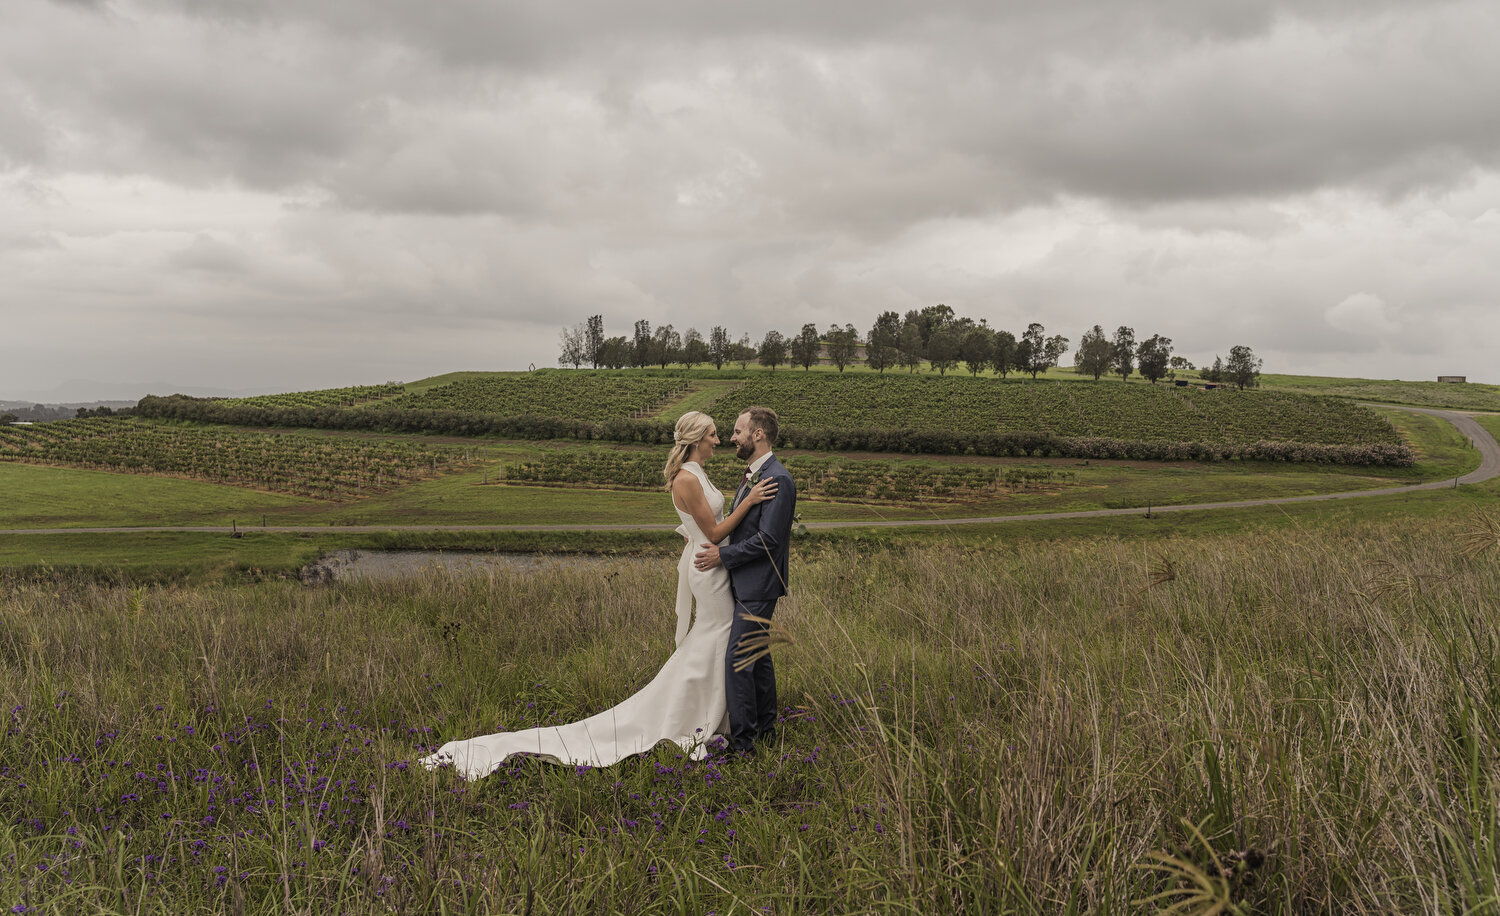  Hunter valley wedding photographer -  -Thierry Boudan Photography 